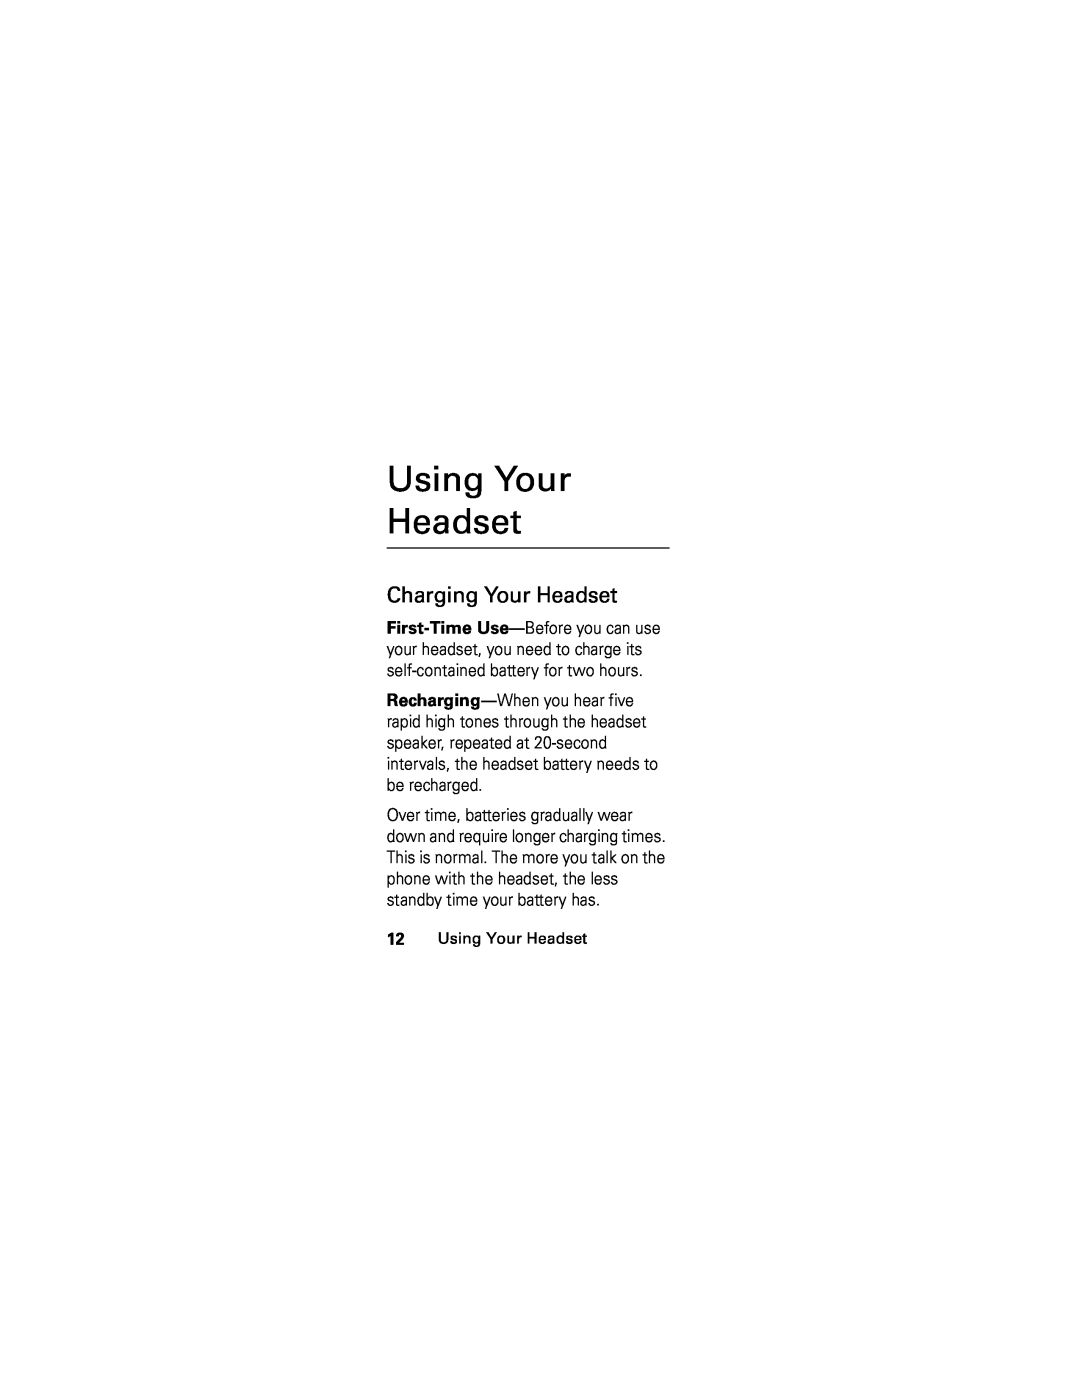 Motorola HS850 manual Using Your Headset, Charging Your Headset 